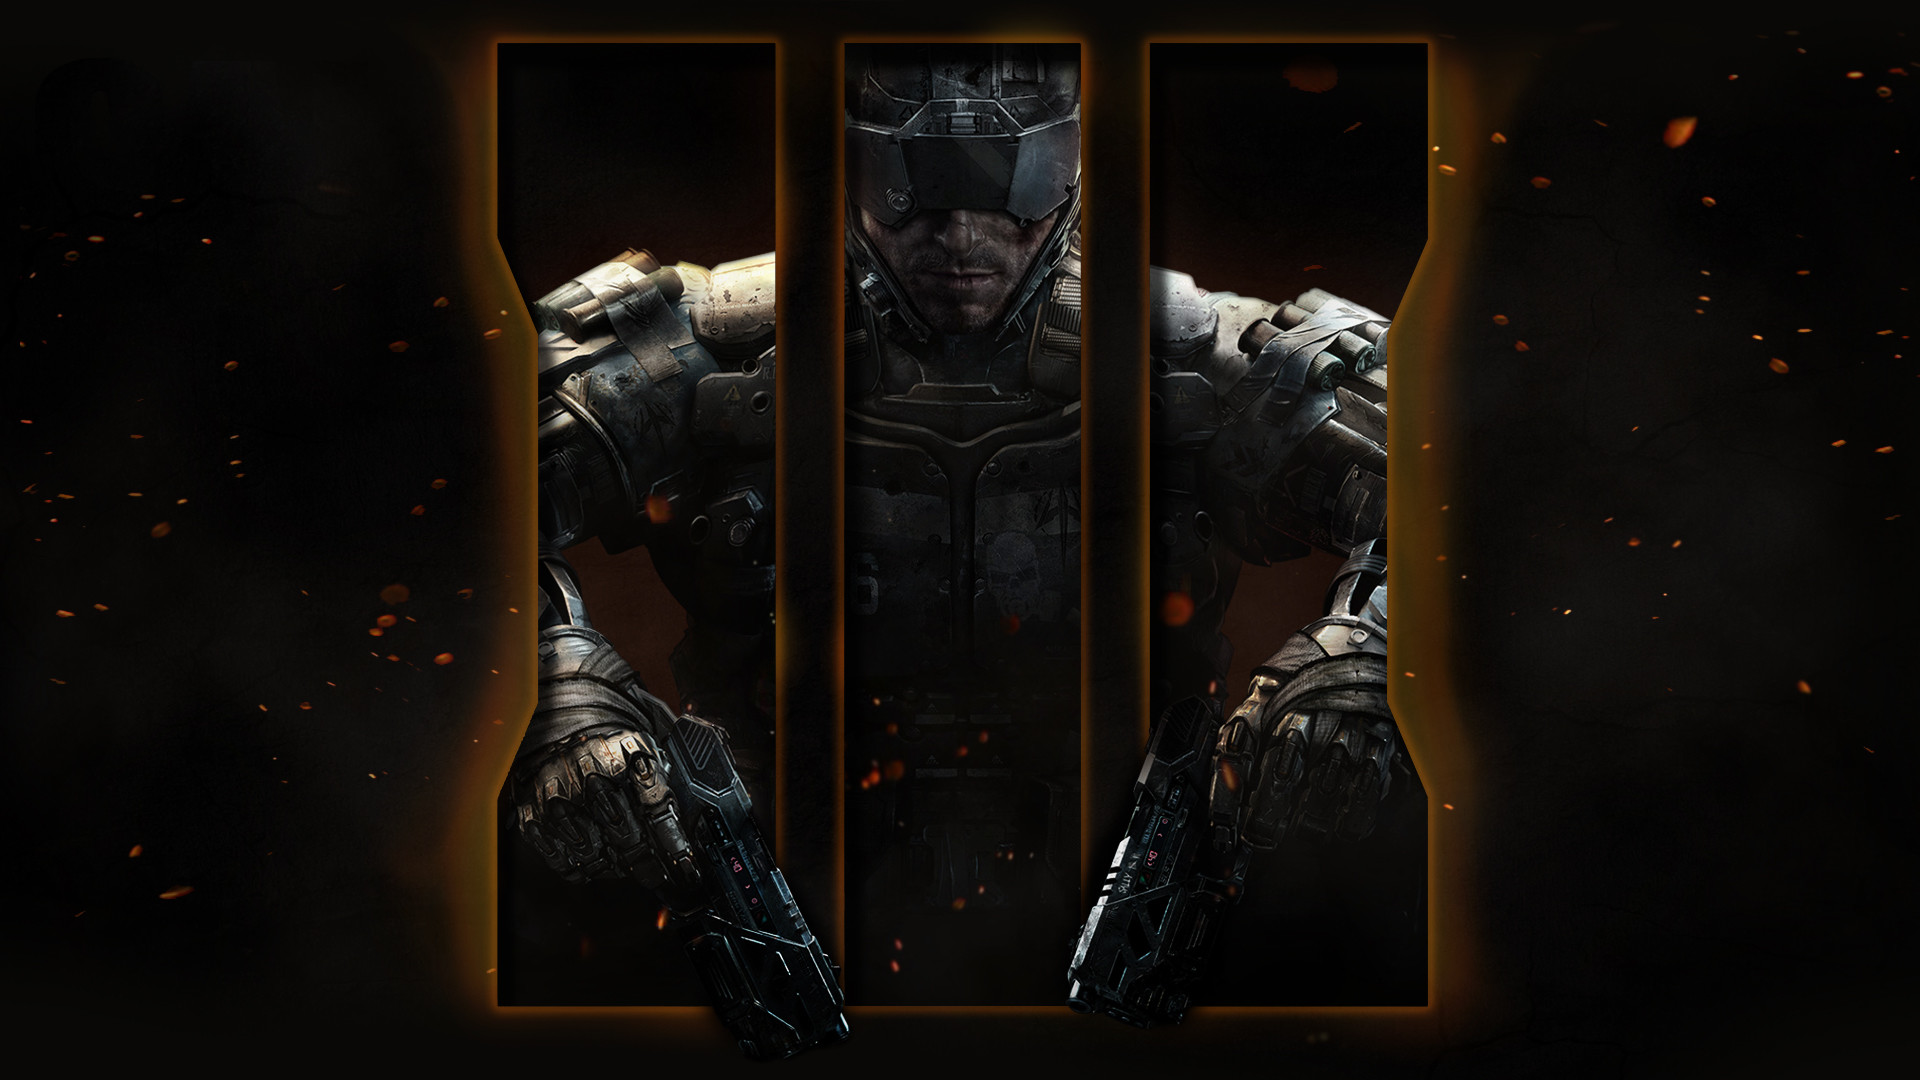 1920x1080 ... Call of Duty: Black Ops 3 Wallpaper 04 by Toby-Affenbude